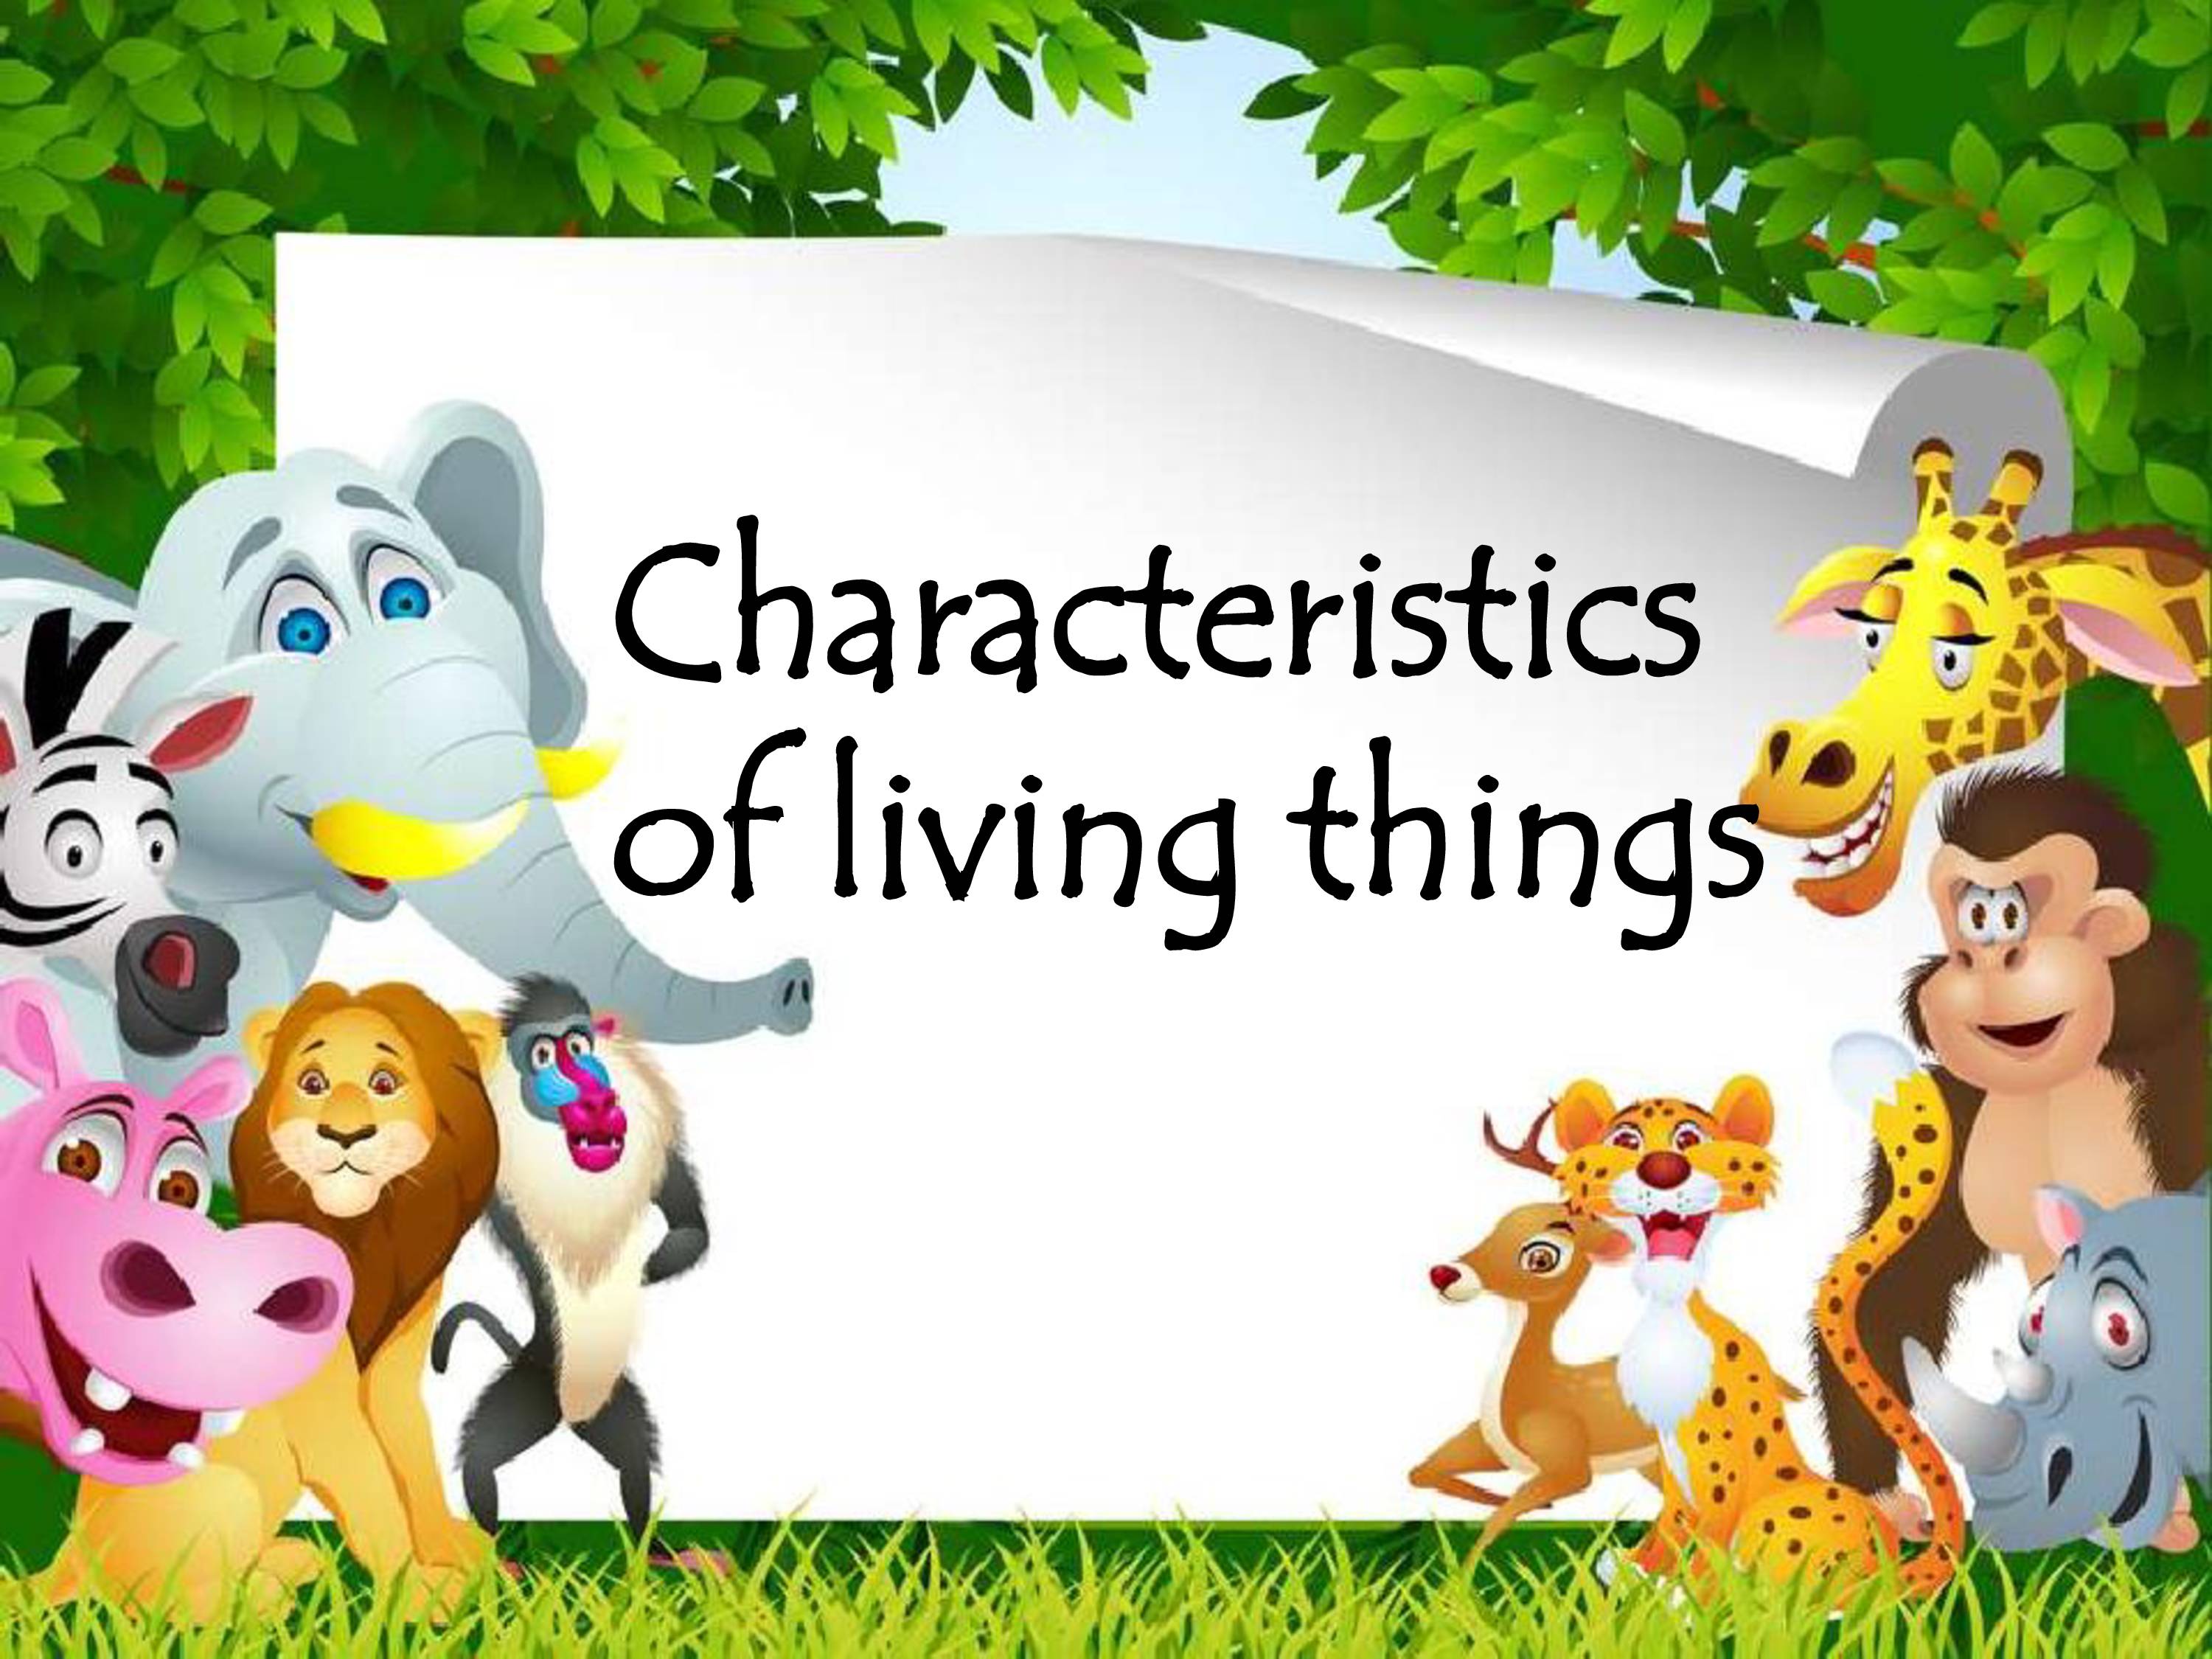 PPT on Characteristics of living things